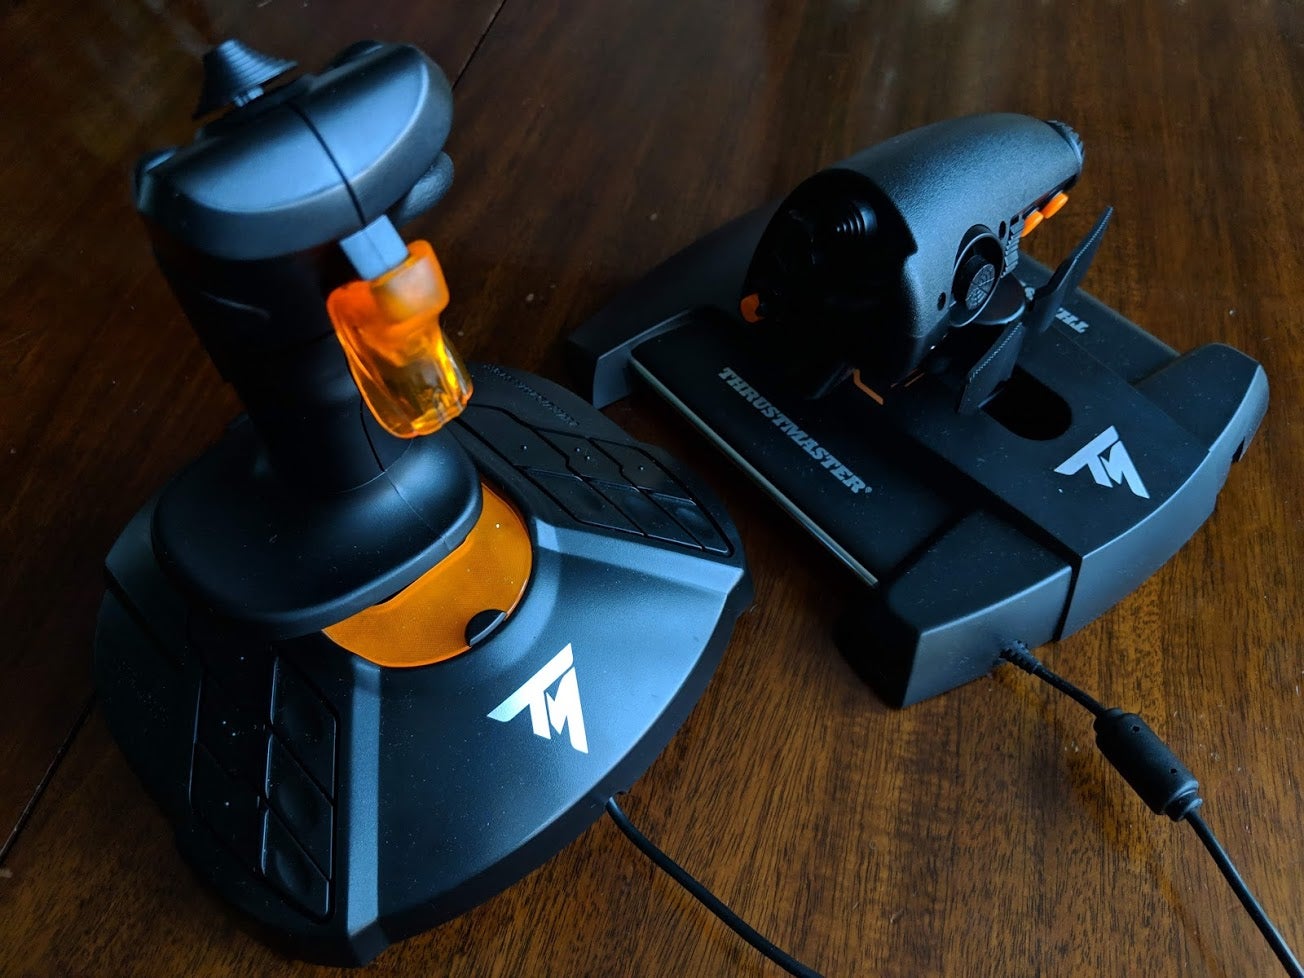 Thrustmaster T.16000m FSC HOTAS Review | Trusted Reviews